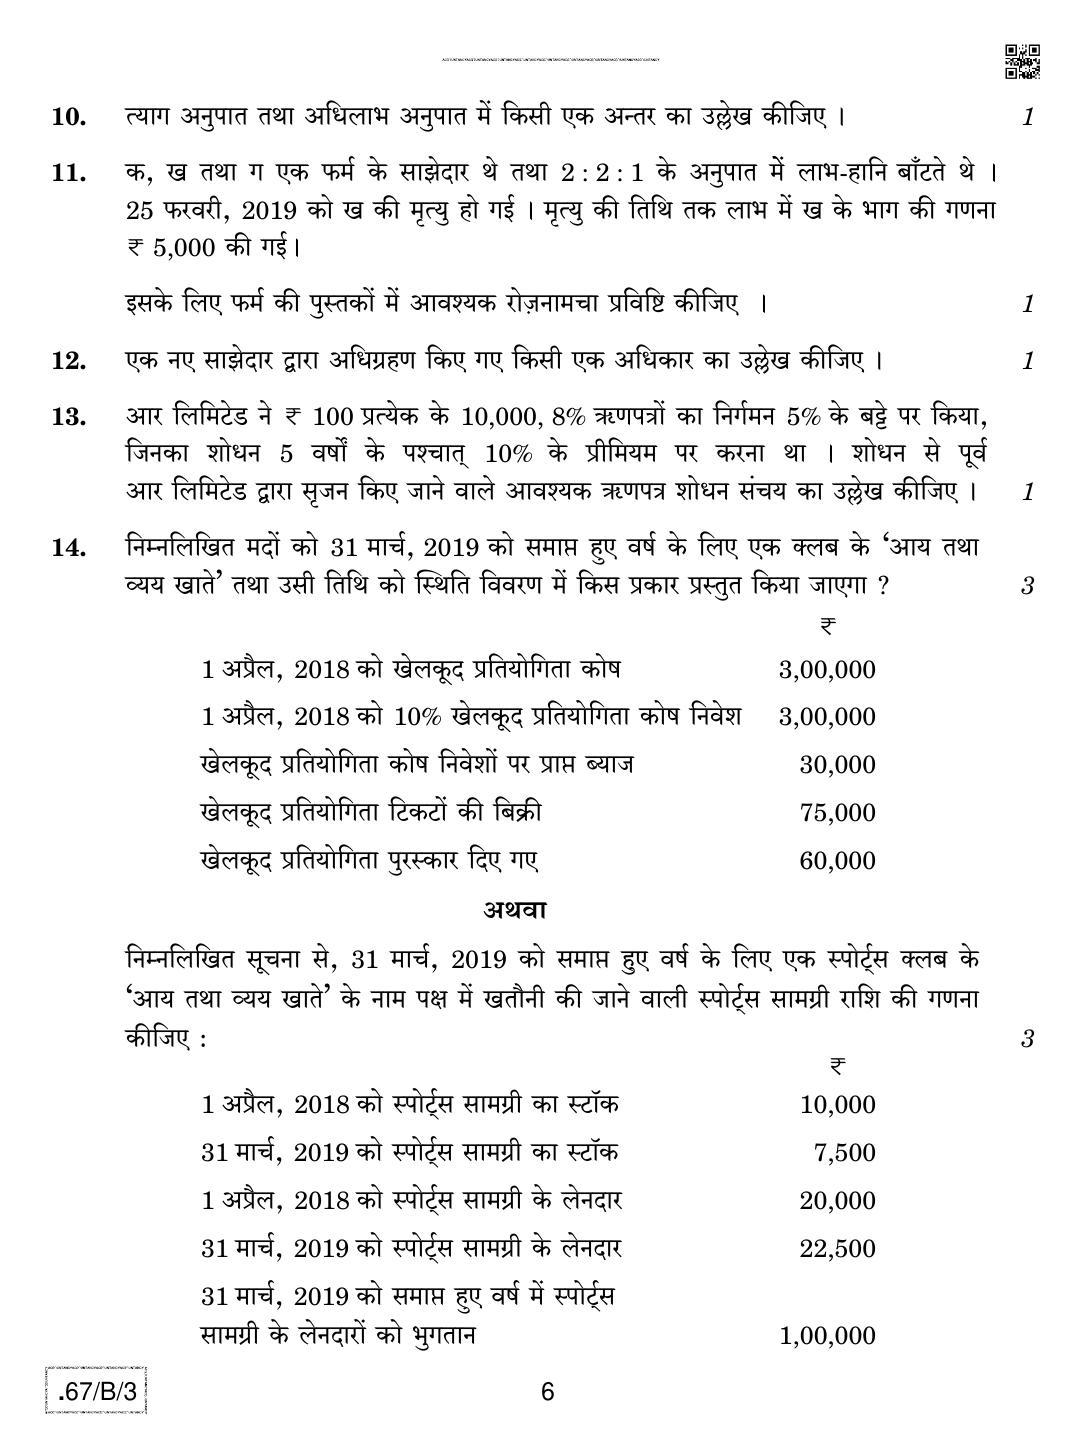 CBSE Class 12 67-C-3 - Accountancy 2020 Compartment Question Paper - Page 6